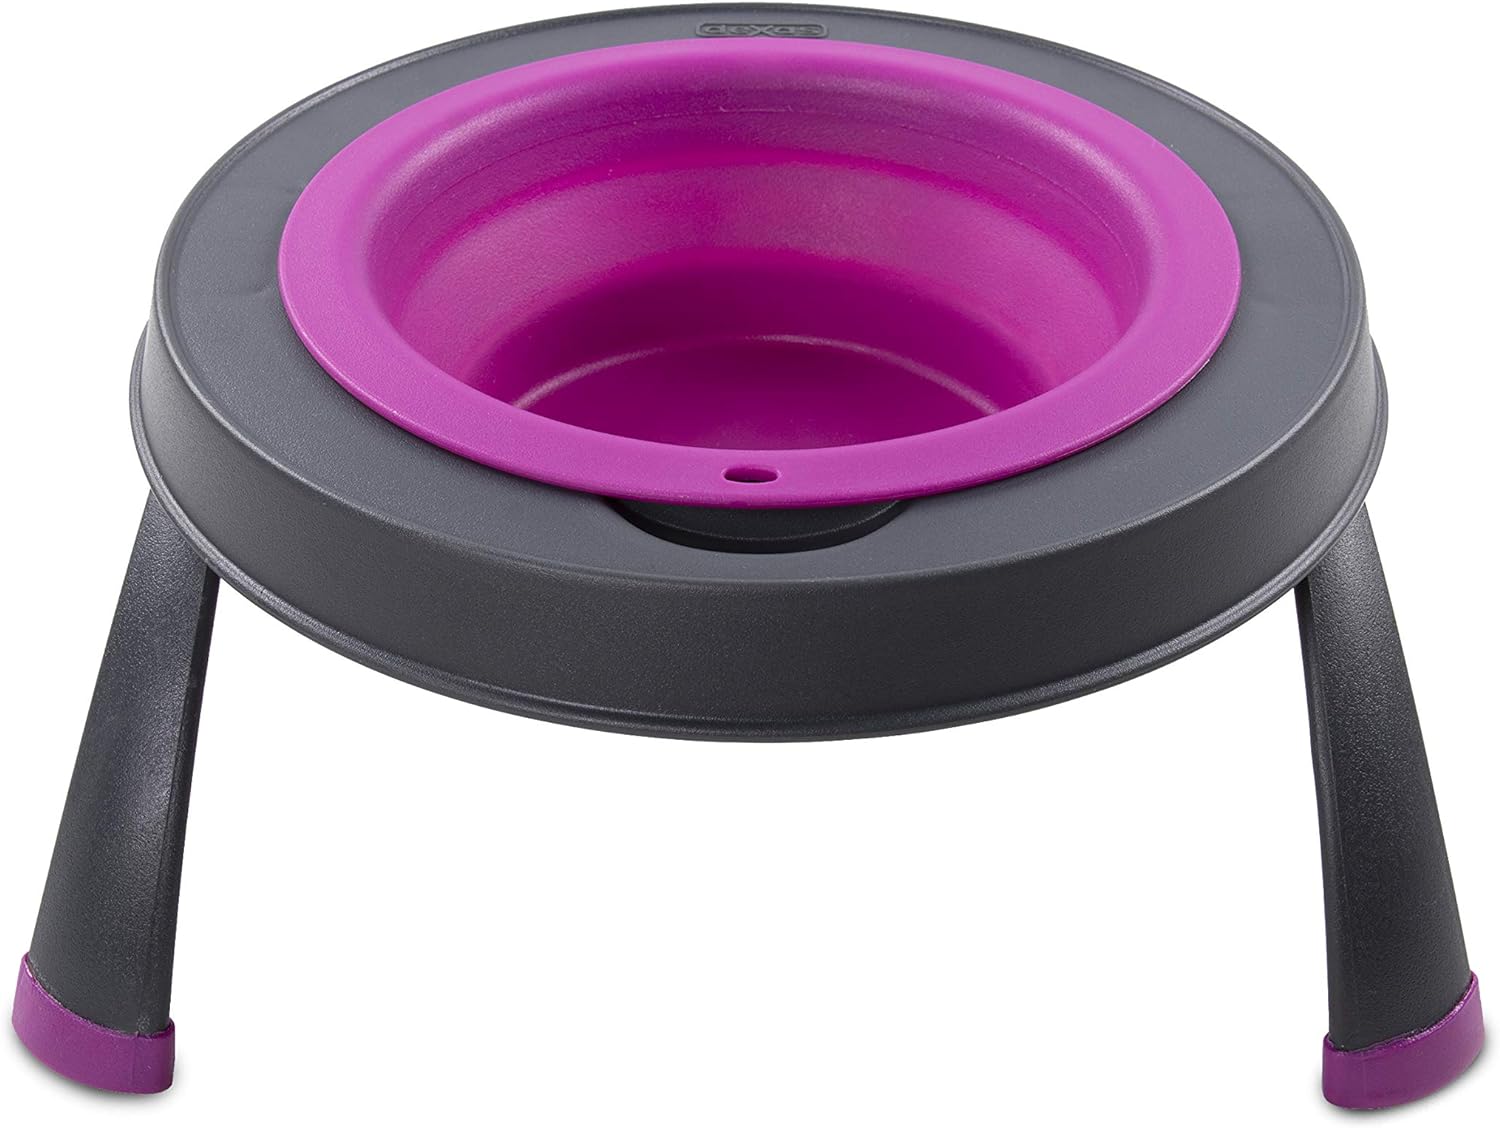 Single Elevated Feeder - *New colors!*